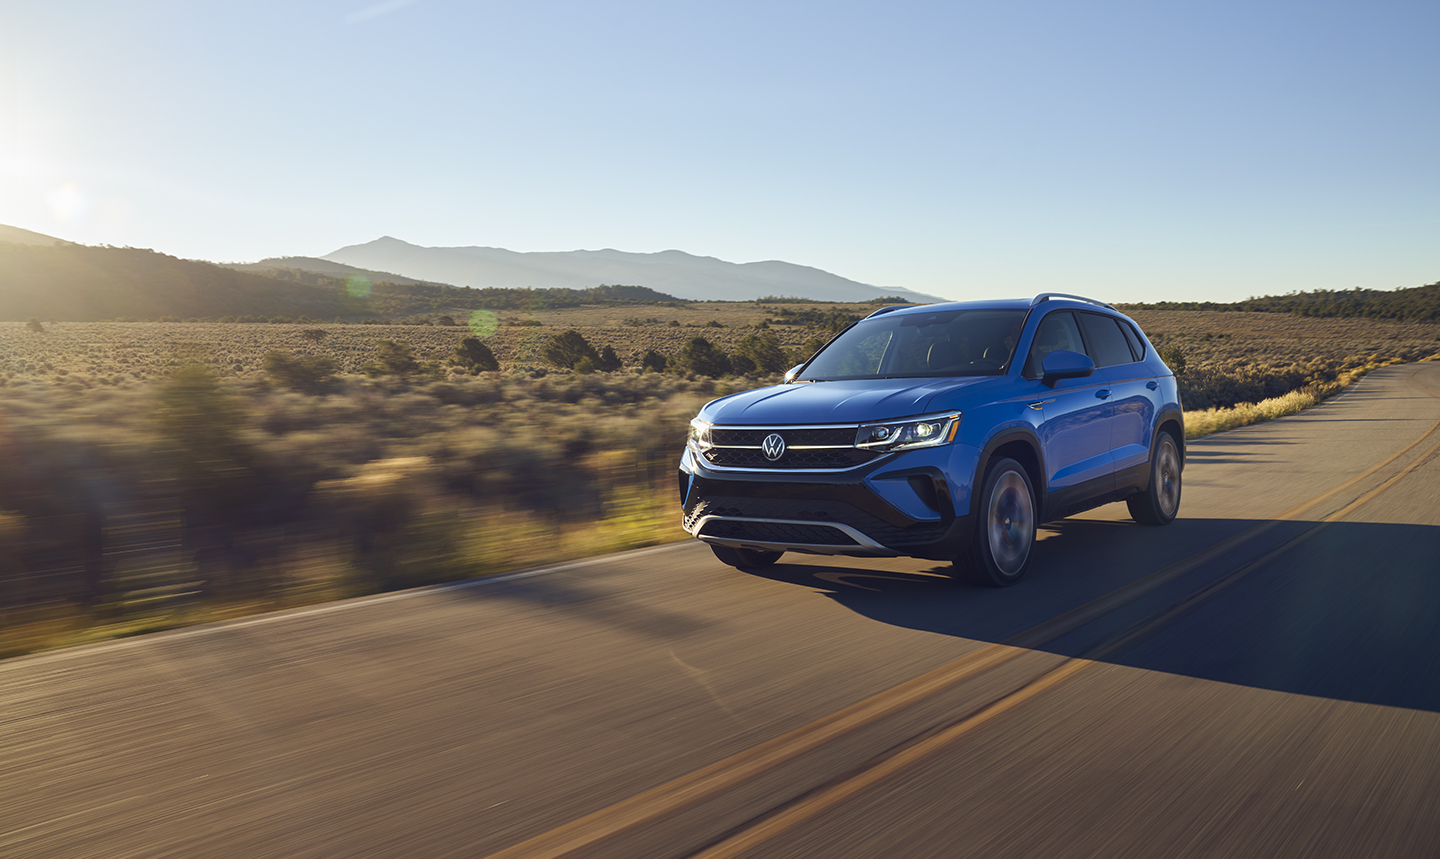 The 2022 Volkswagen Taos driving on the road